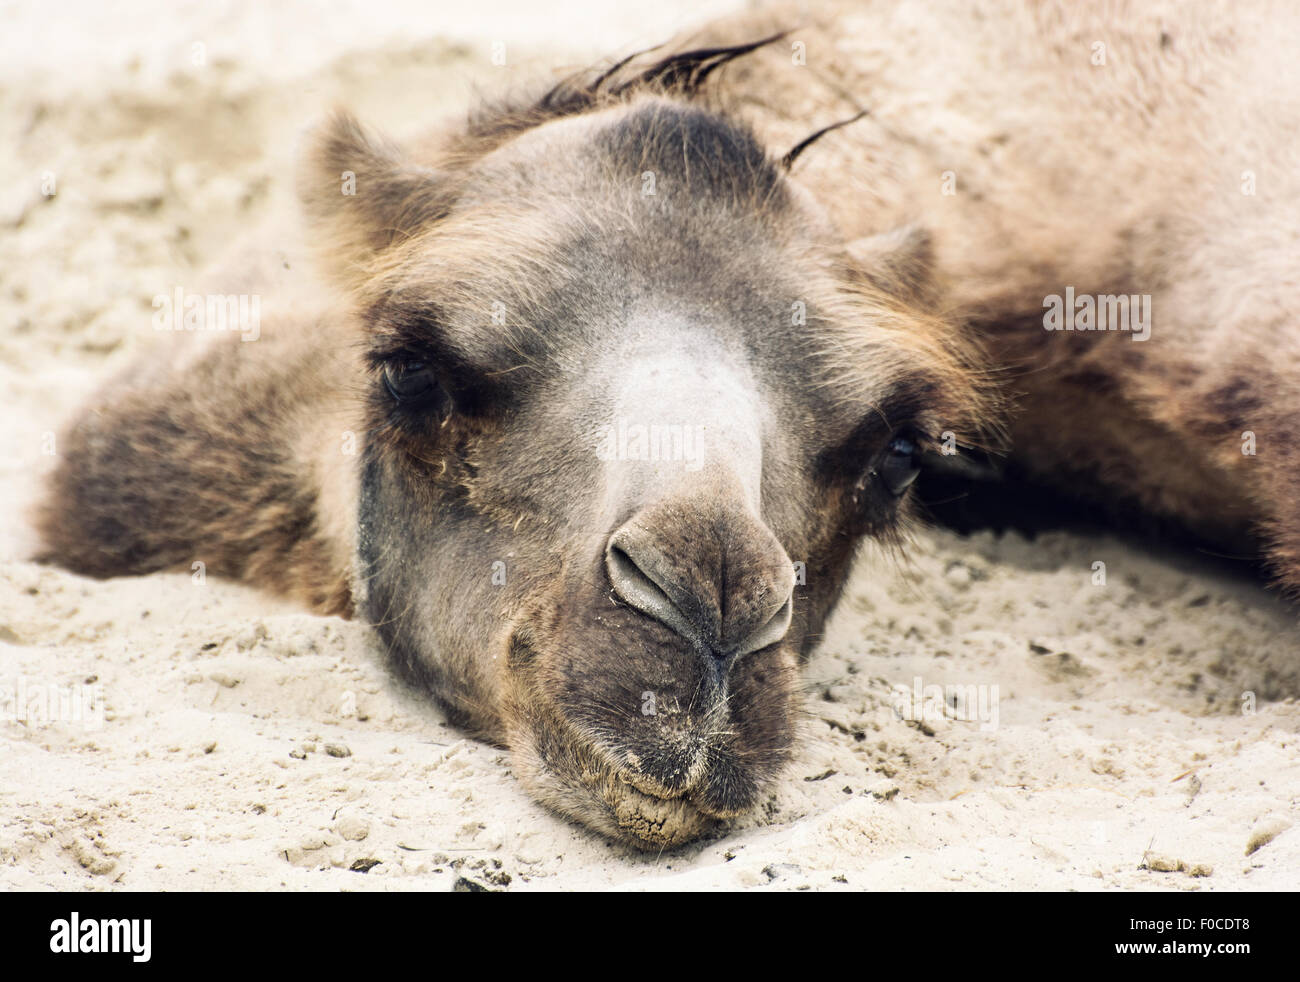 Bactrian camel (Camelus bactrianus) lying and relaxing in the sand by ...